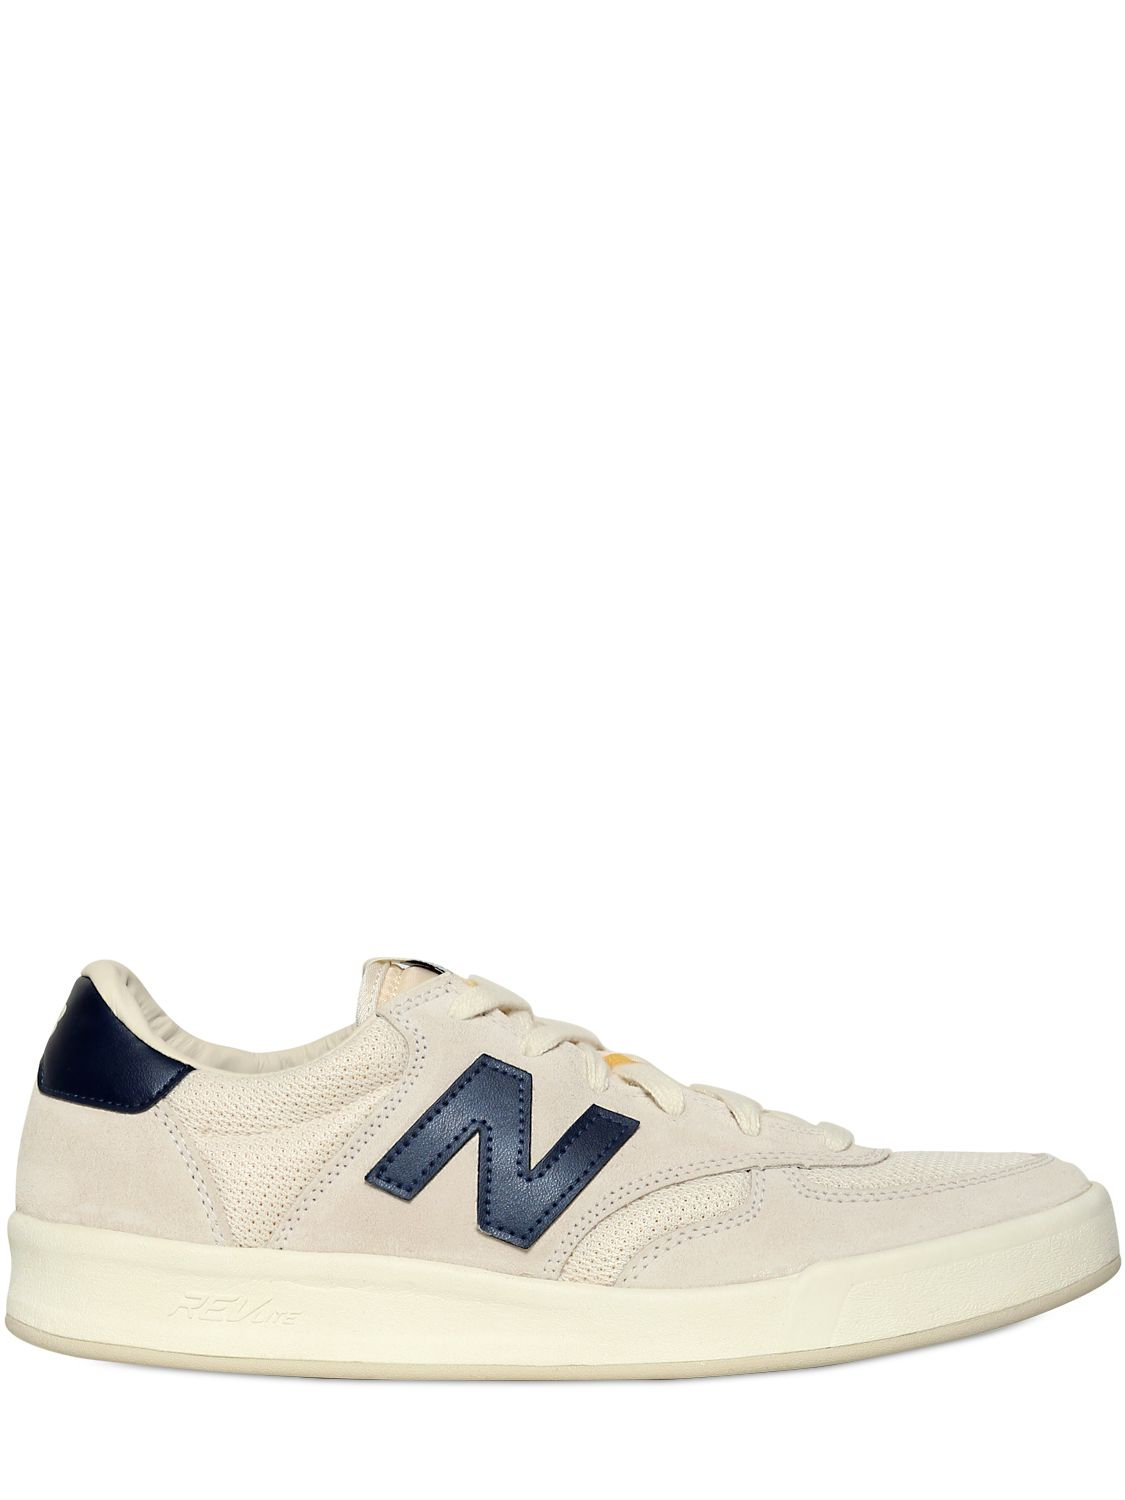 Lyst - New Balance 300 Suede & Mesh Tennis Sneakers in White for Men